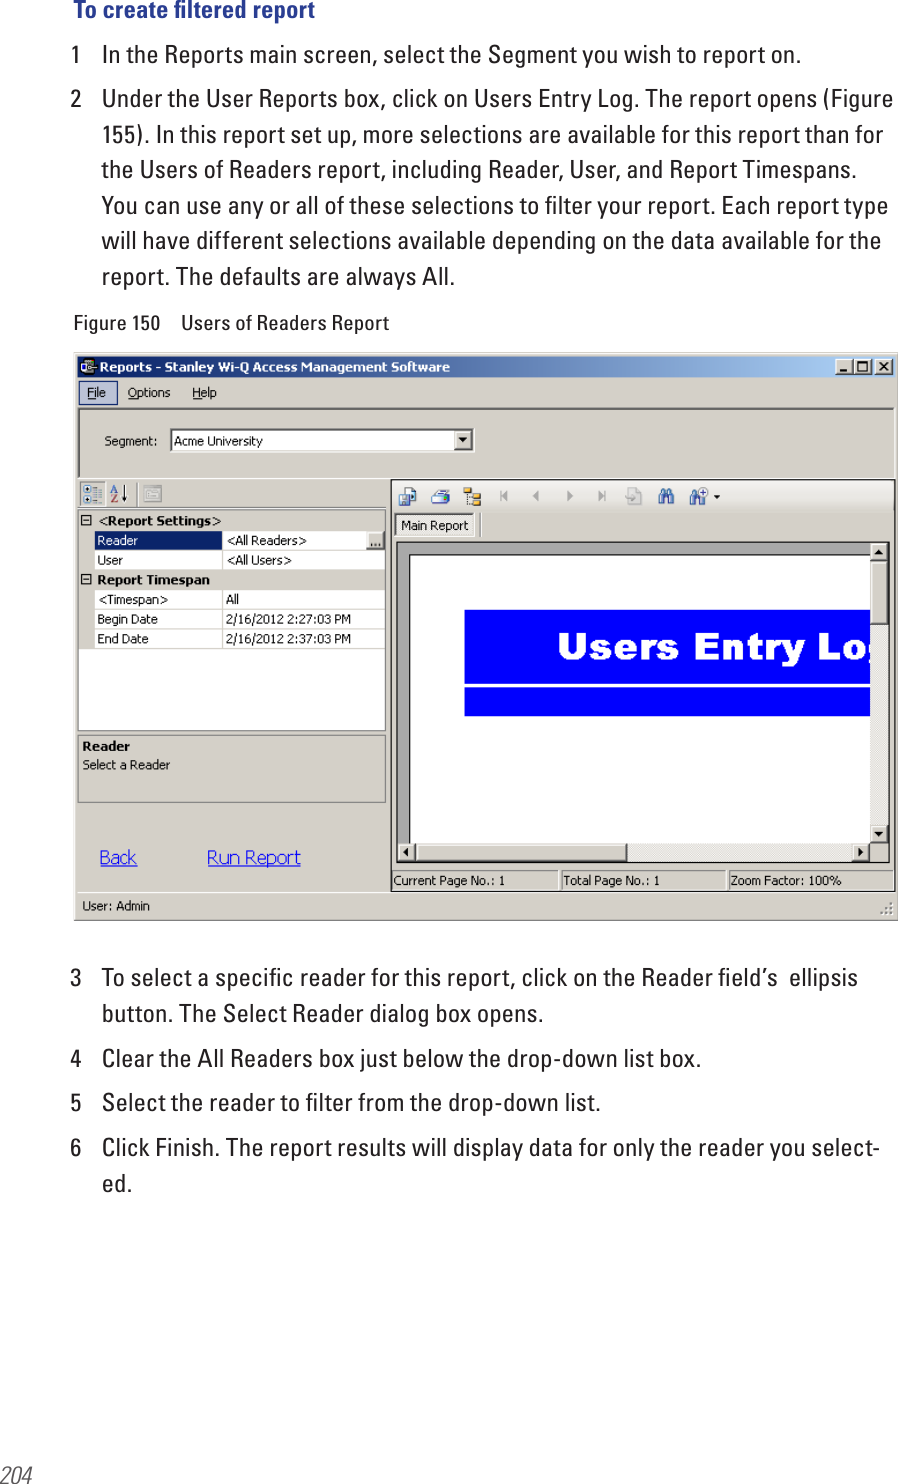 204To create ﬁltered report1  In the Reports main screen, select the Segment you wish to report on.2  Under the User Reports box, click on Users Entry Log. The report opens (Figure 155). In this report set up, more selections are available for this report than for the Users of Readers report, including Reader, User, and Report Timespans. You can use any or all of these selections to ﬁlter your report. Each report type will have different selections available depending on the data available for the report. The defaults are always All.Figure 150  Users of Readers Report3  To select a speciﬁc reader for this report, click on the Reader ﬁeld’s  ellipsis button. The Select Reader dialog box opens.4  Clear the All Readers box just below the drop-down list box.5  Select the reader to ﬁlter from the drop-down list.6  Click Finish. The report results will display data for only the reader you select-ed.